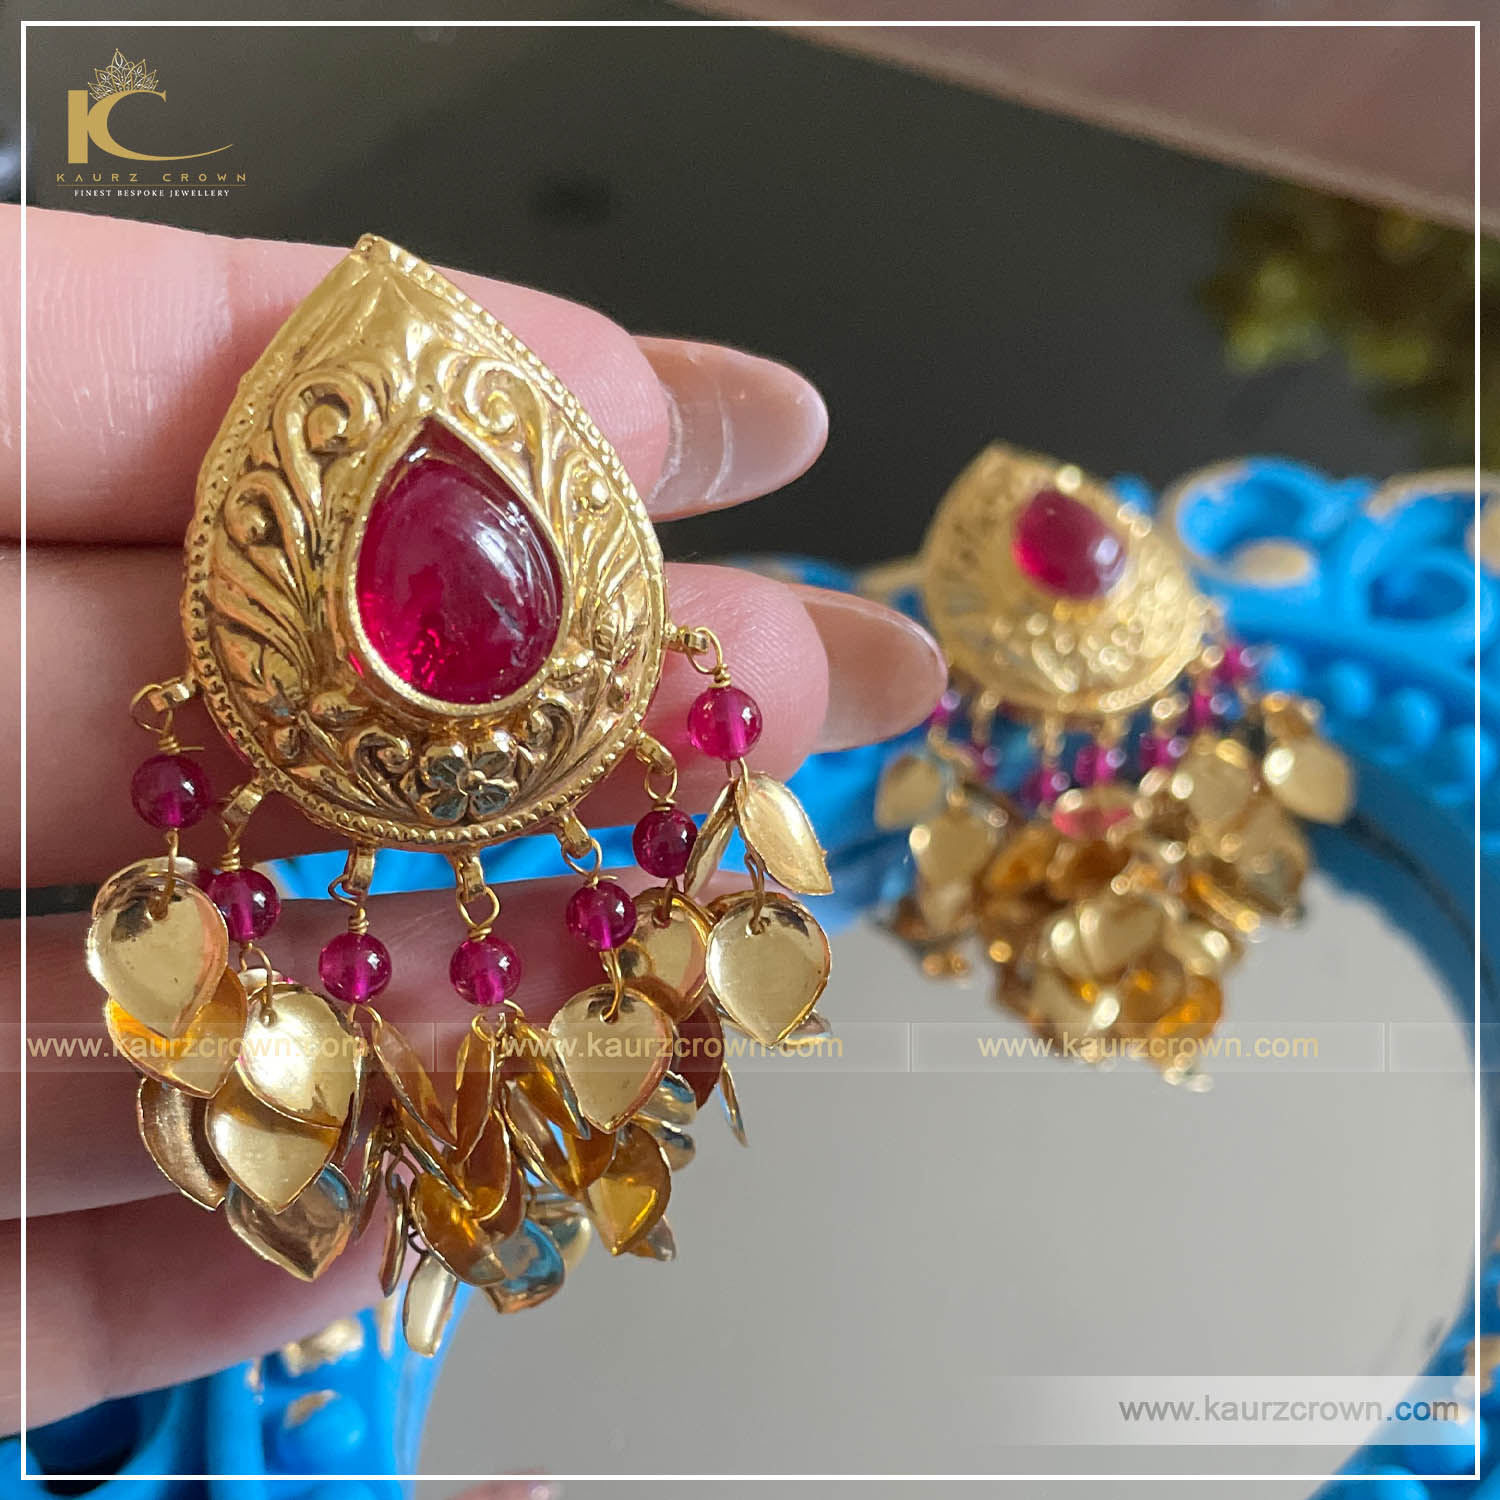 Hania Traditional Antique Gold Plated Earrings , kaurz crown jewellery , hania traditional antique , punjabi jewellery , gold plated , earrings